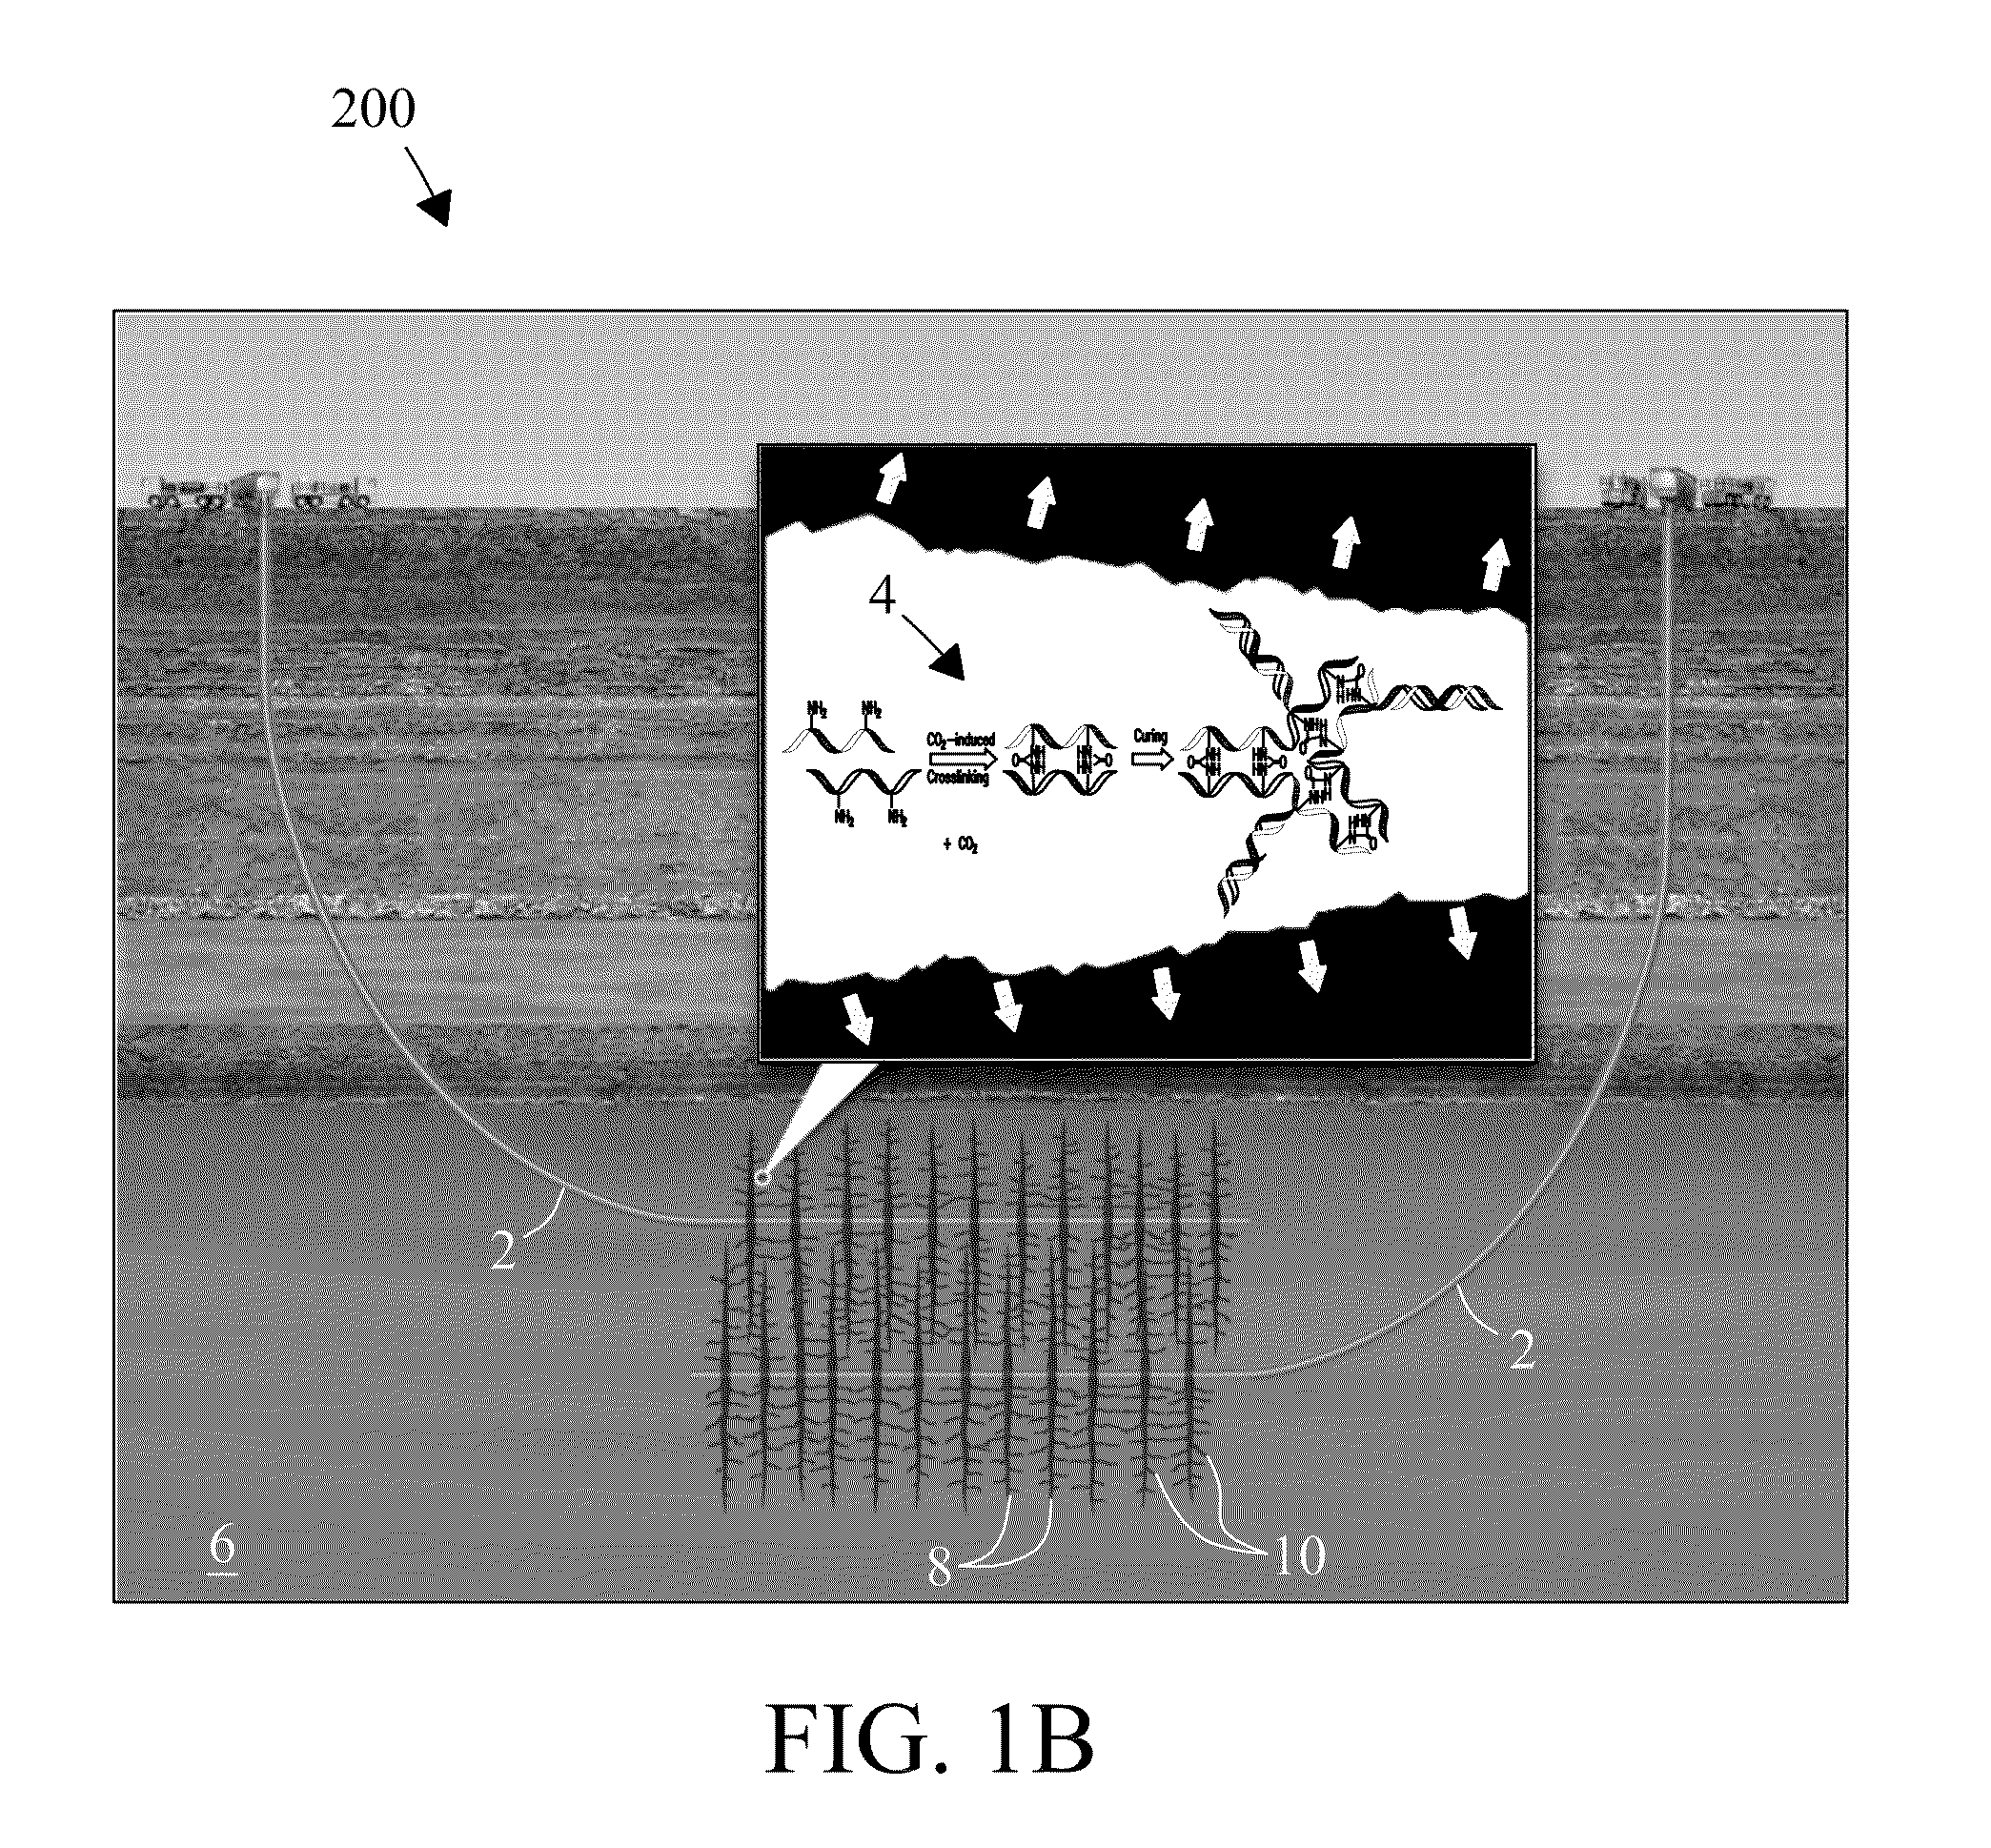 Electrophilic acid gas-reactive fluid, proppant, and process for enhanced fracturing and recovery of energy producing materials